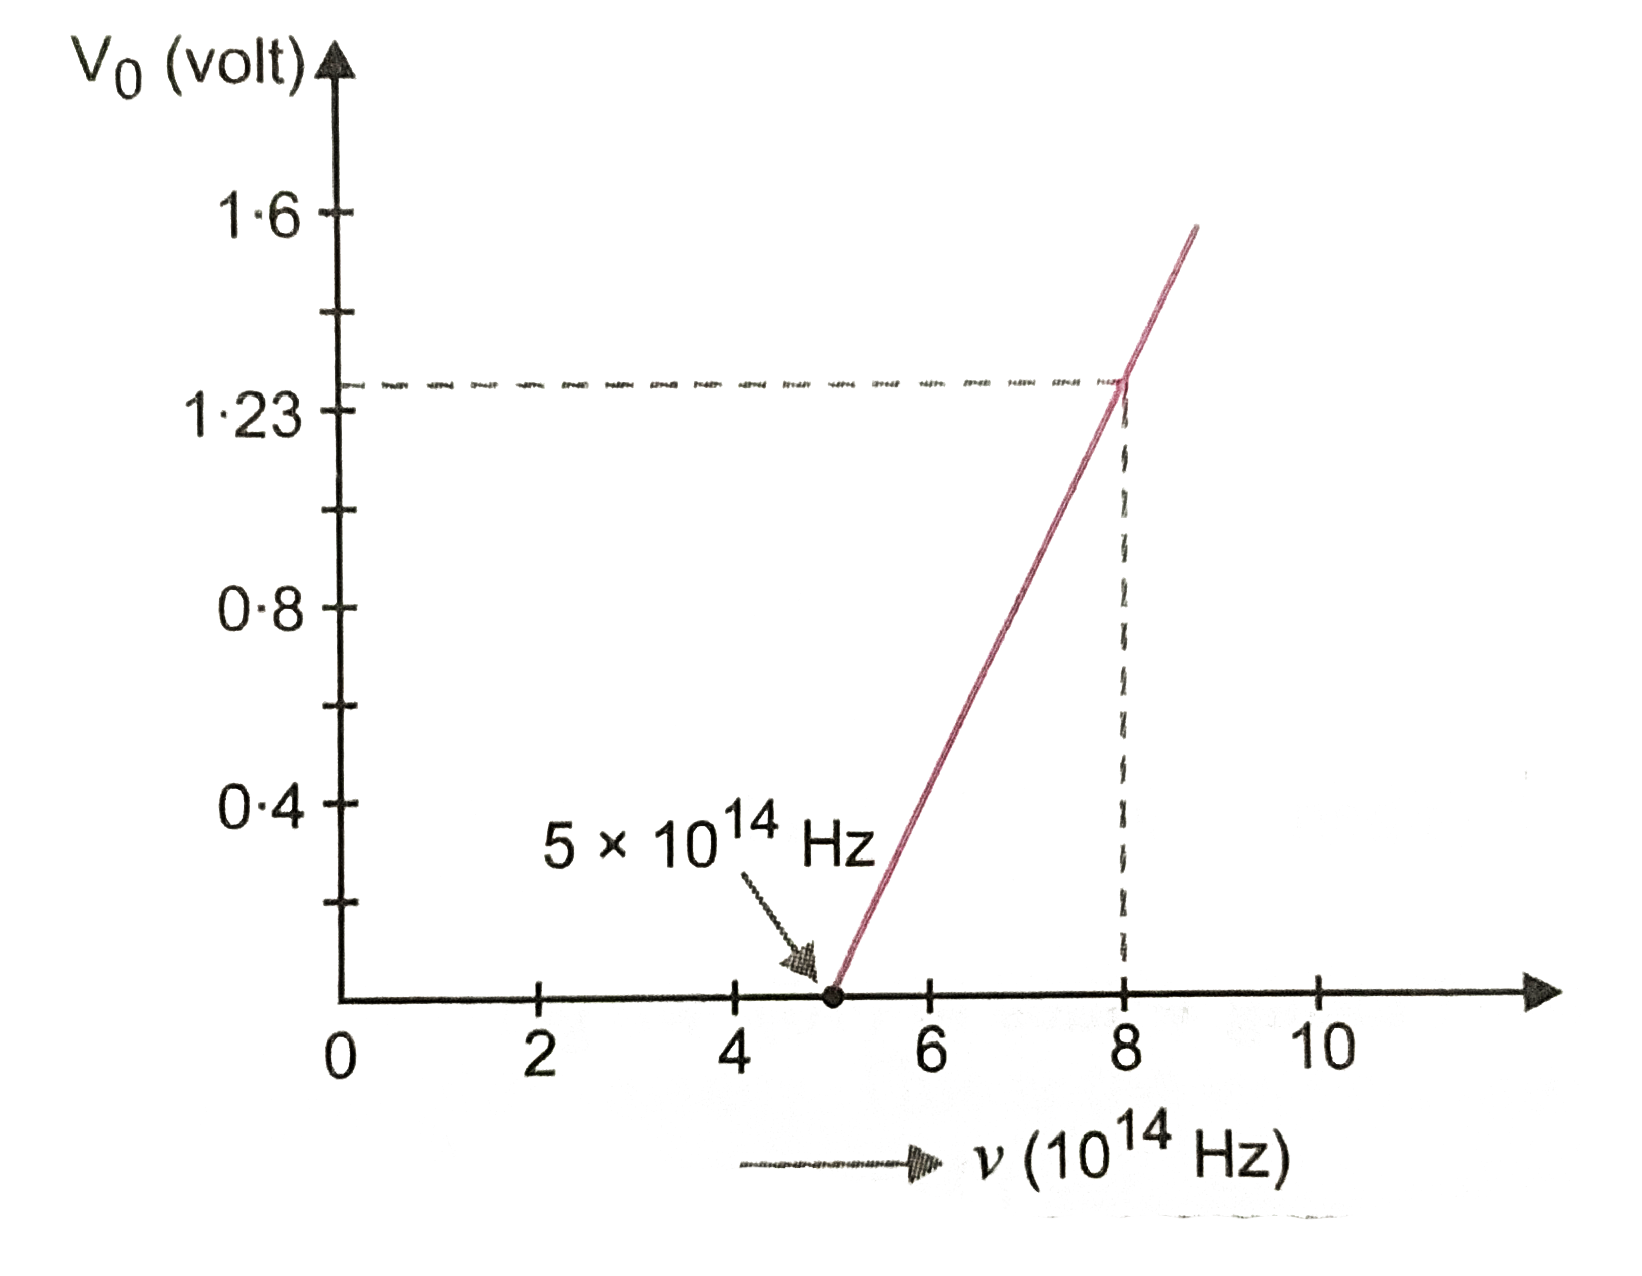 Using the graph shown in fig for stopping potential vs the incident frequency of photons, calculate Planck's constant.